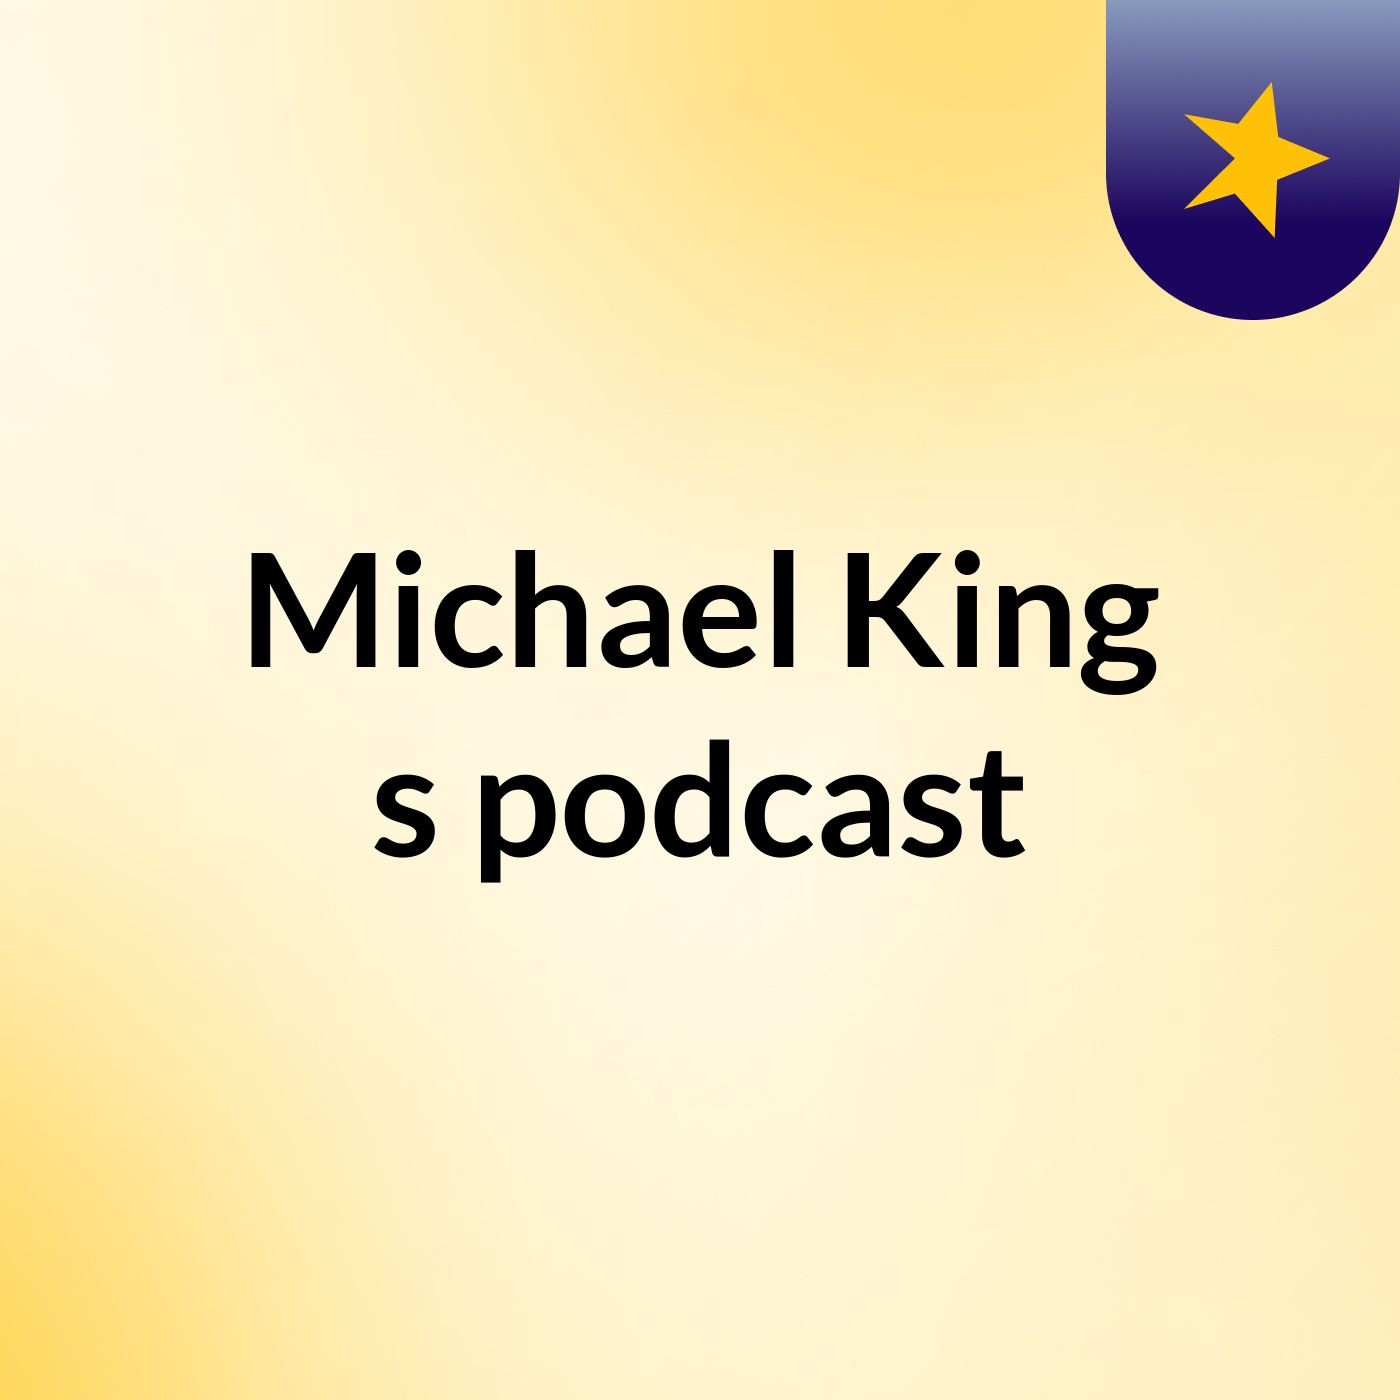 Episode 3 - Michael King's podcast